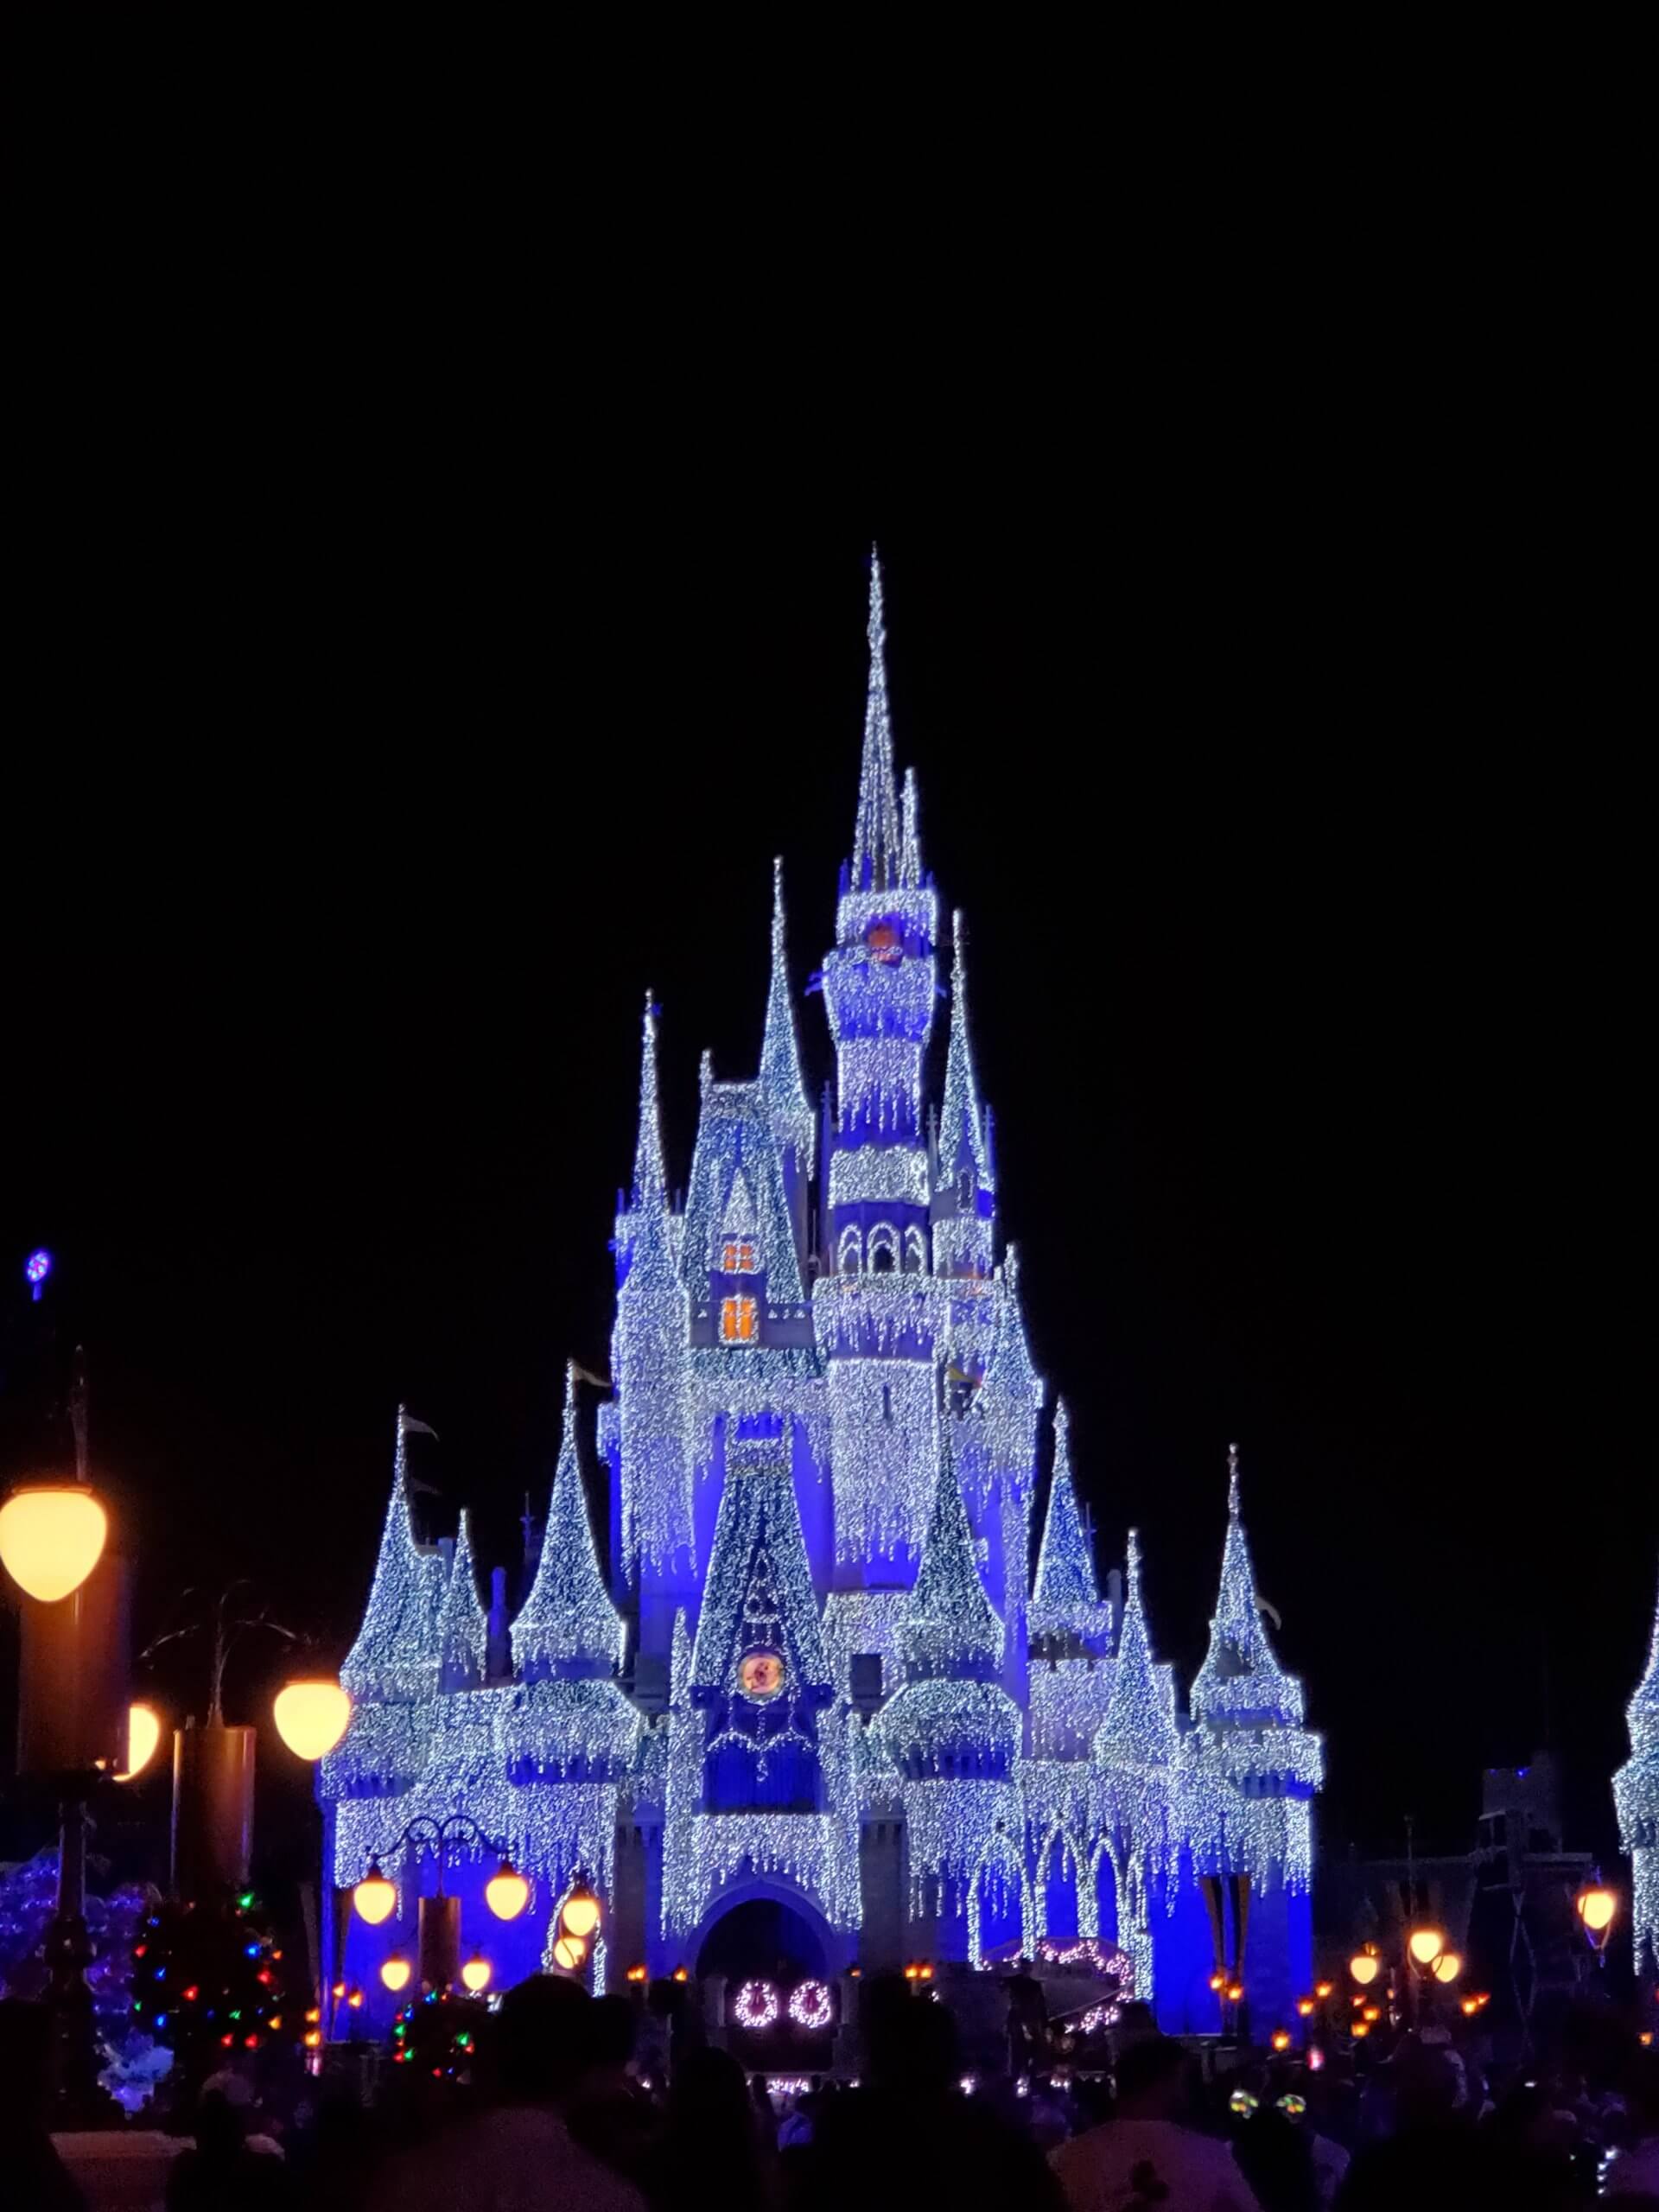 When is the best time to visit Disney World?